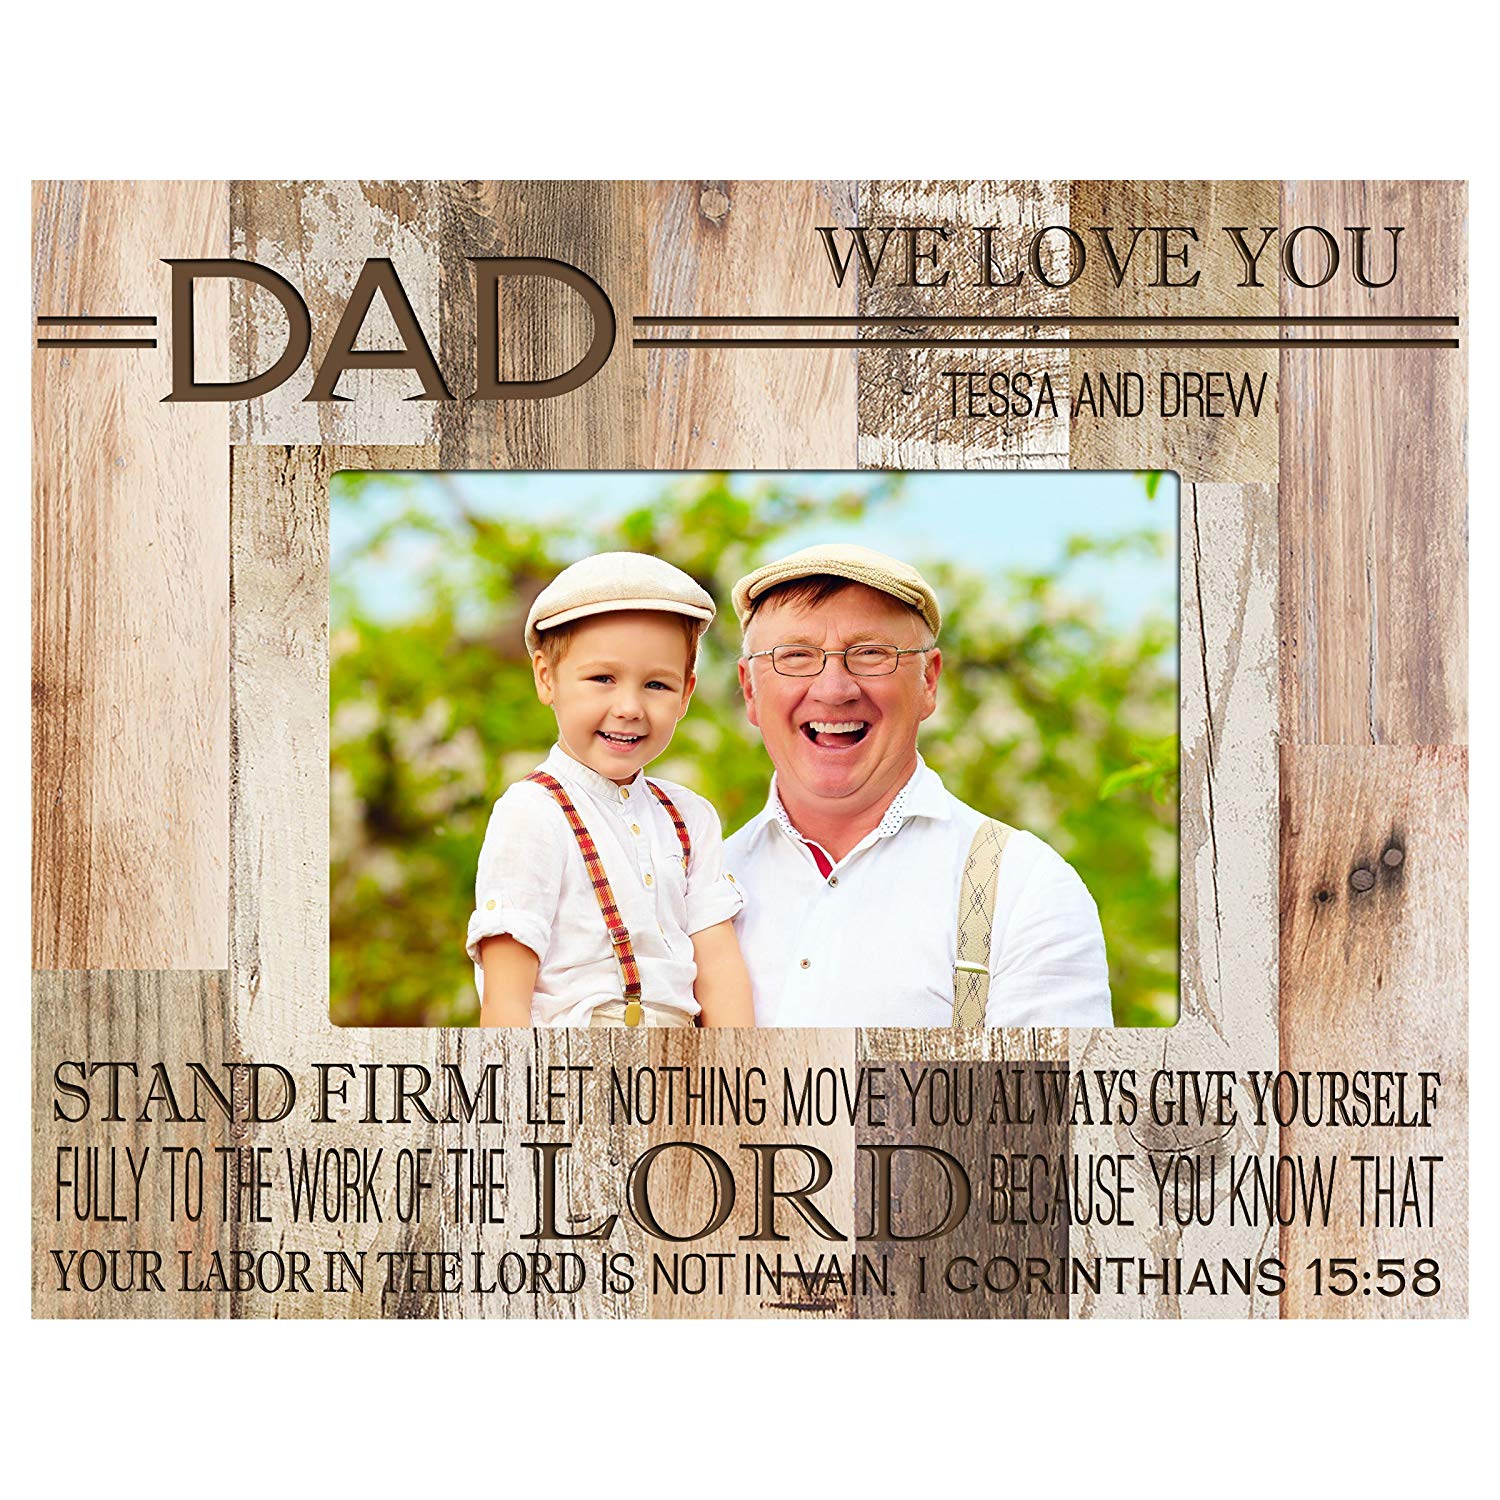 Personalized Engraved Birthday Picture Frame Gift for Dad - 1 Corinthians 15:58 - LifeSong Milestones